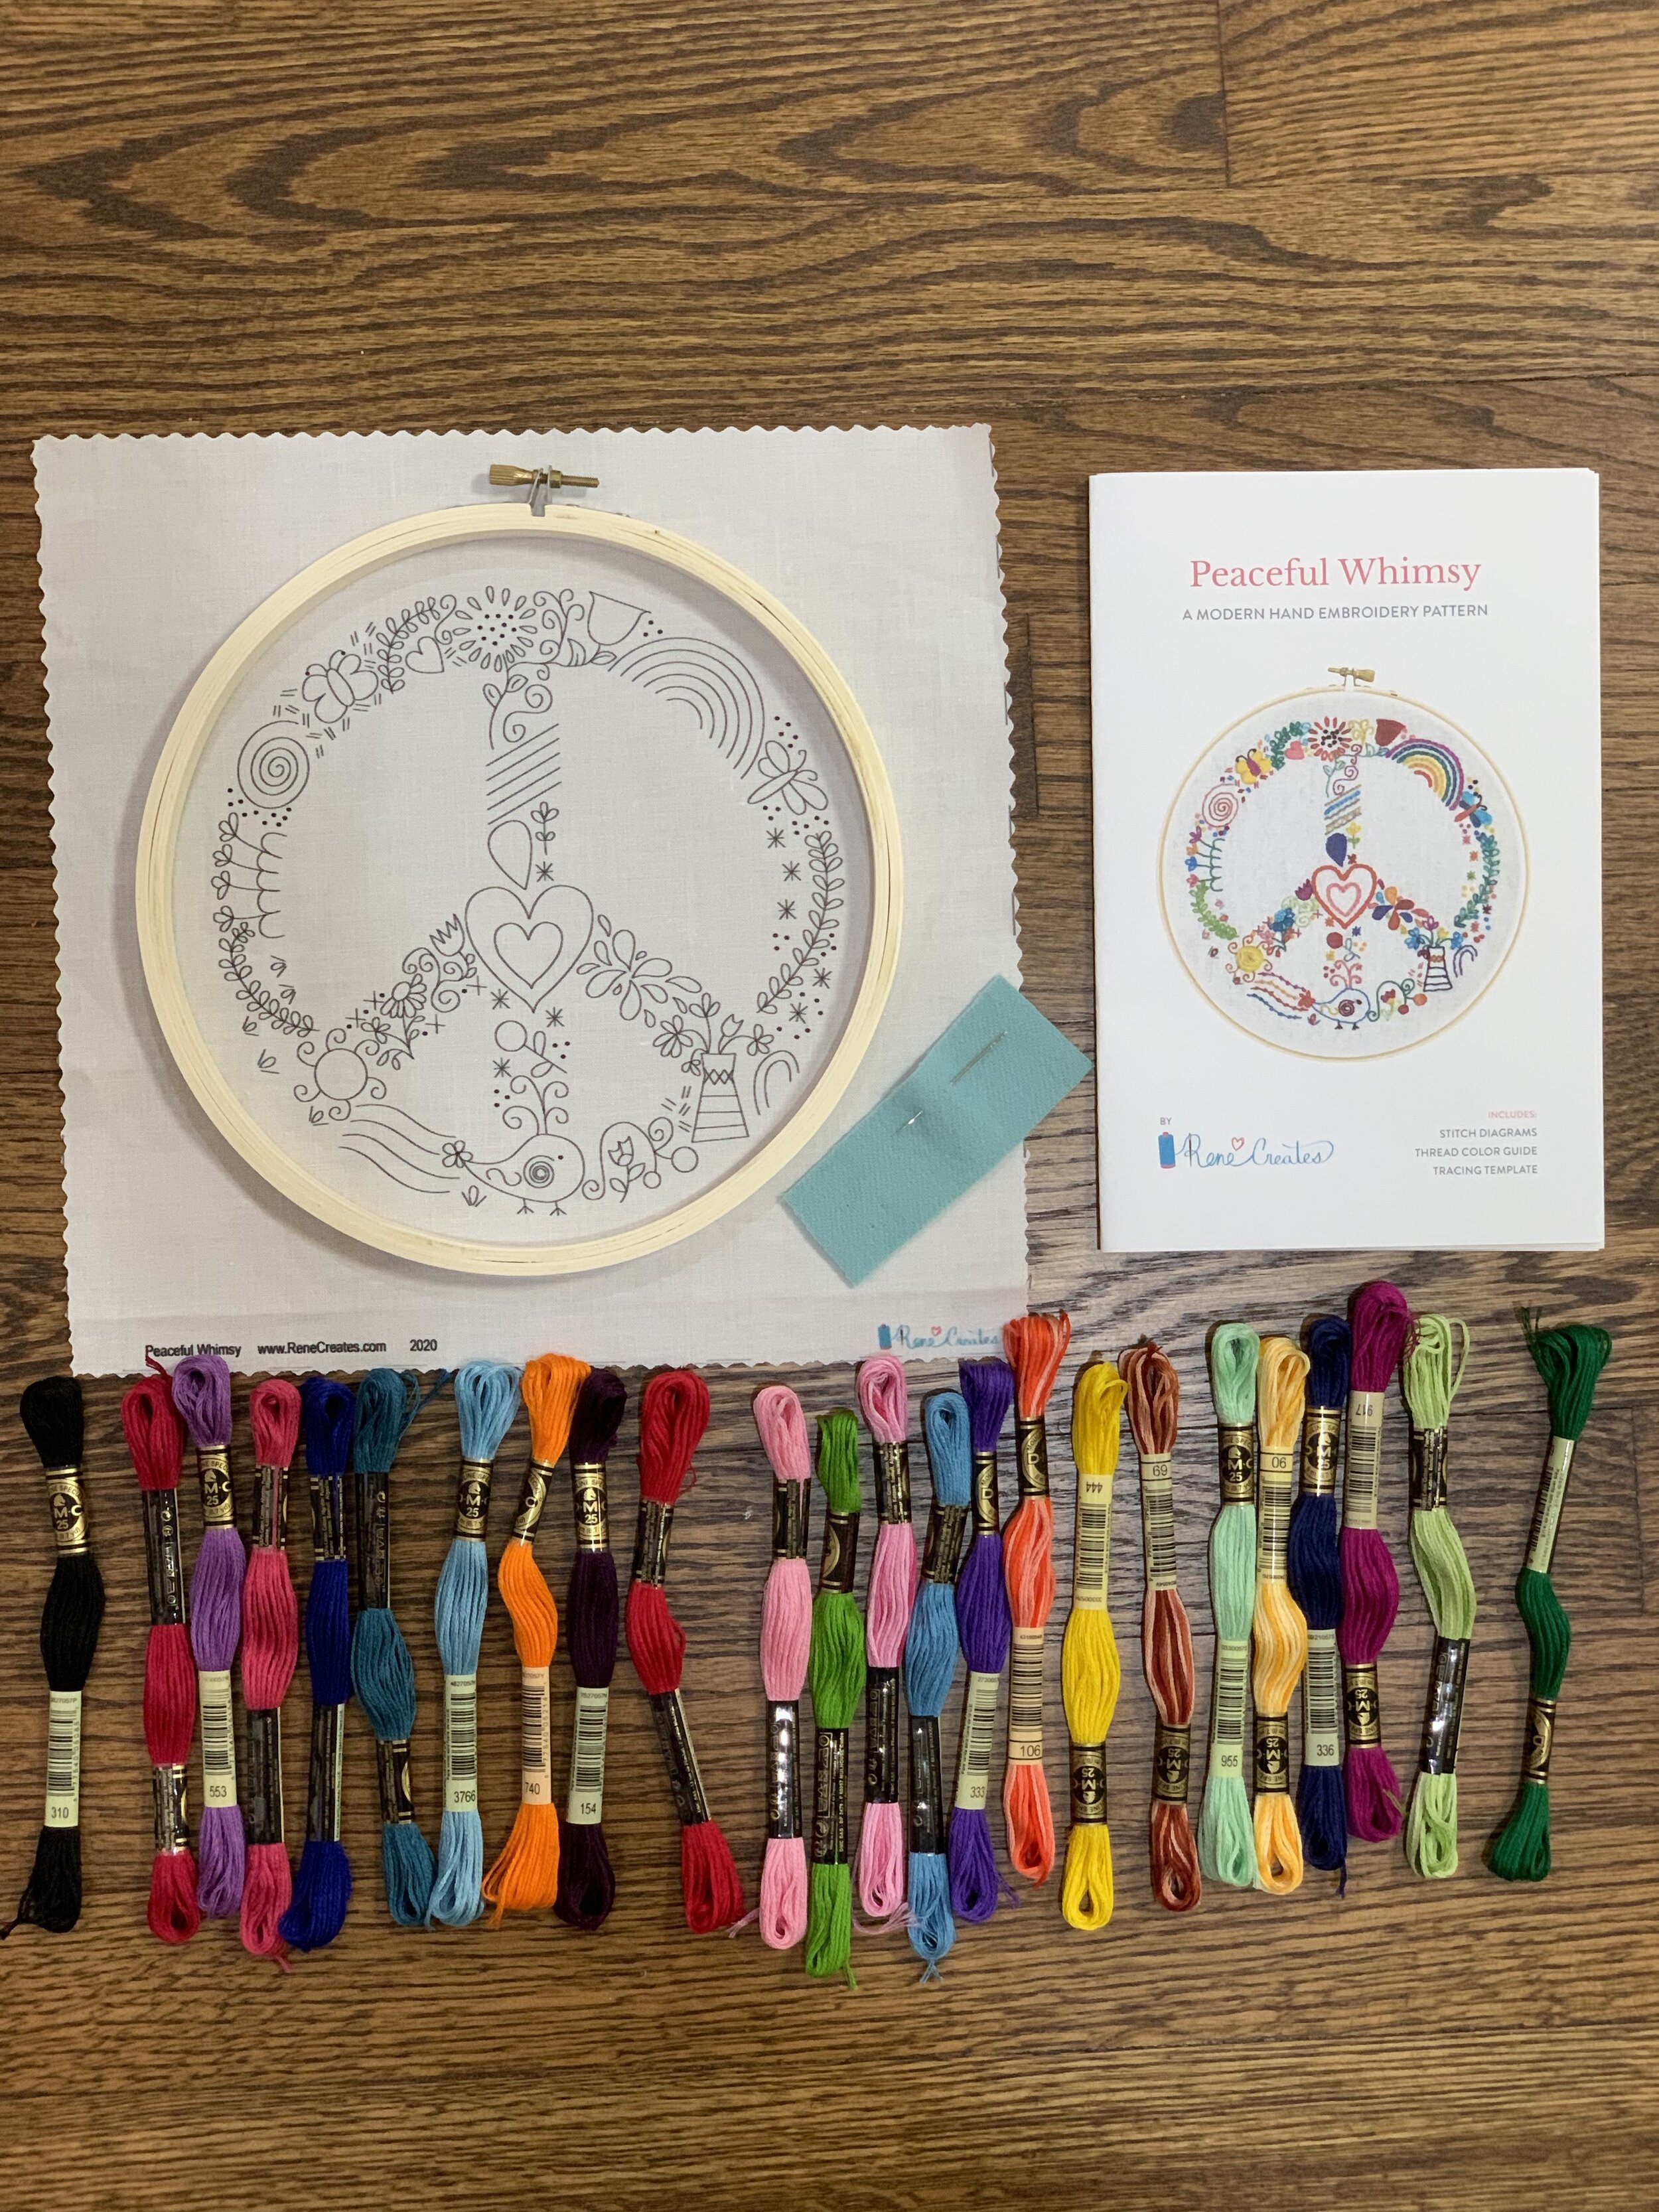 Preprinted Fabric thread hoop needle Peaceful Whimsy Modern Hand Embroidery Kit peace sign Embroidery Kit Complete kit includes Pattern